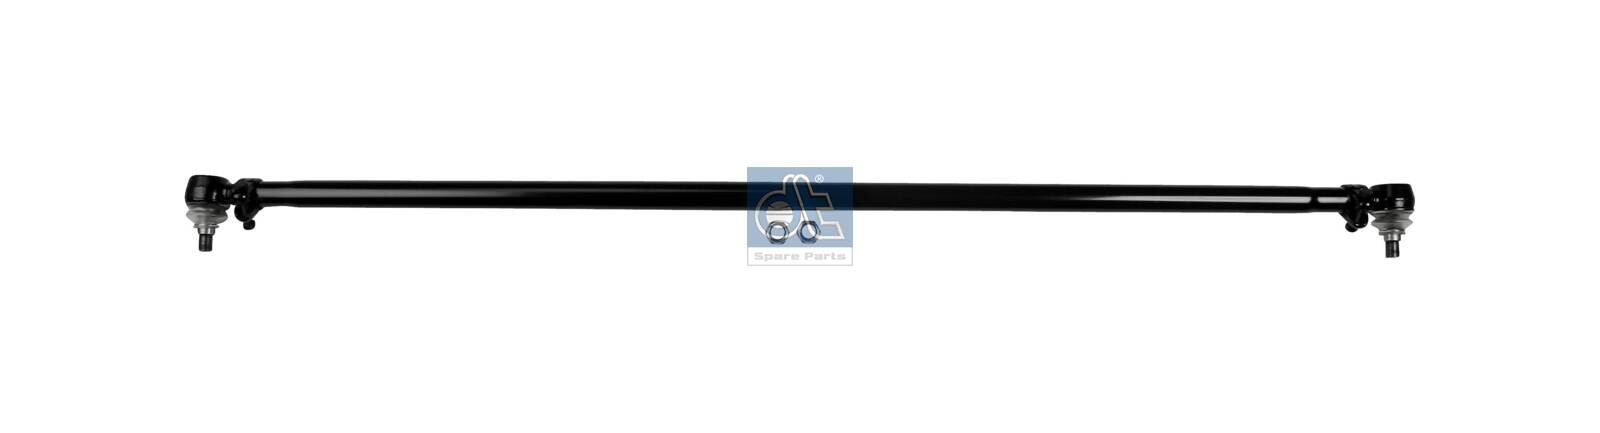 DT Spare Parts 4.64591 Rod Assembly 970 330 00 03